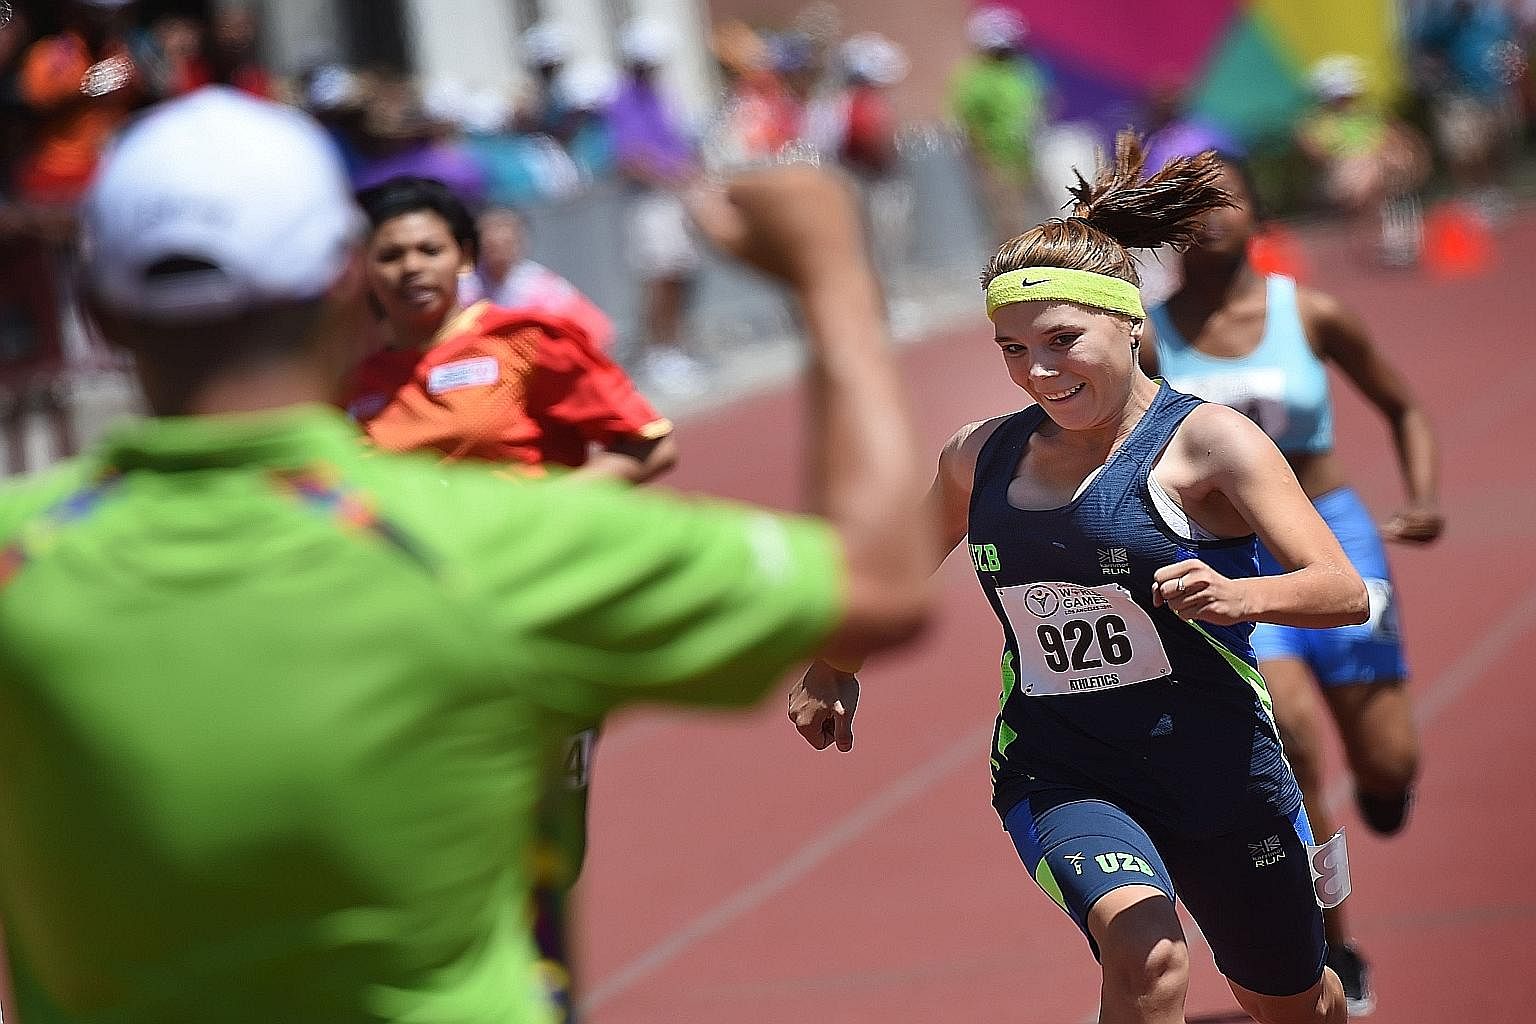 Rufina Shagardanova of Uzbekistan winning her track heat at the 2015 Special Olympics World Games in Los Angeles on Sunday. About 6,500 amateur athletes from 165 countries are taking part in this year's Games. The competition, started in 1968, has gr